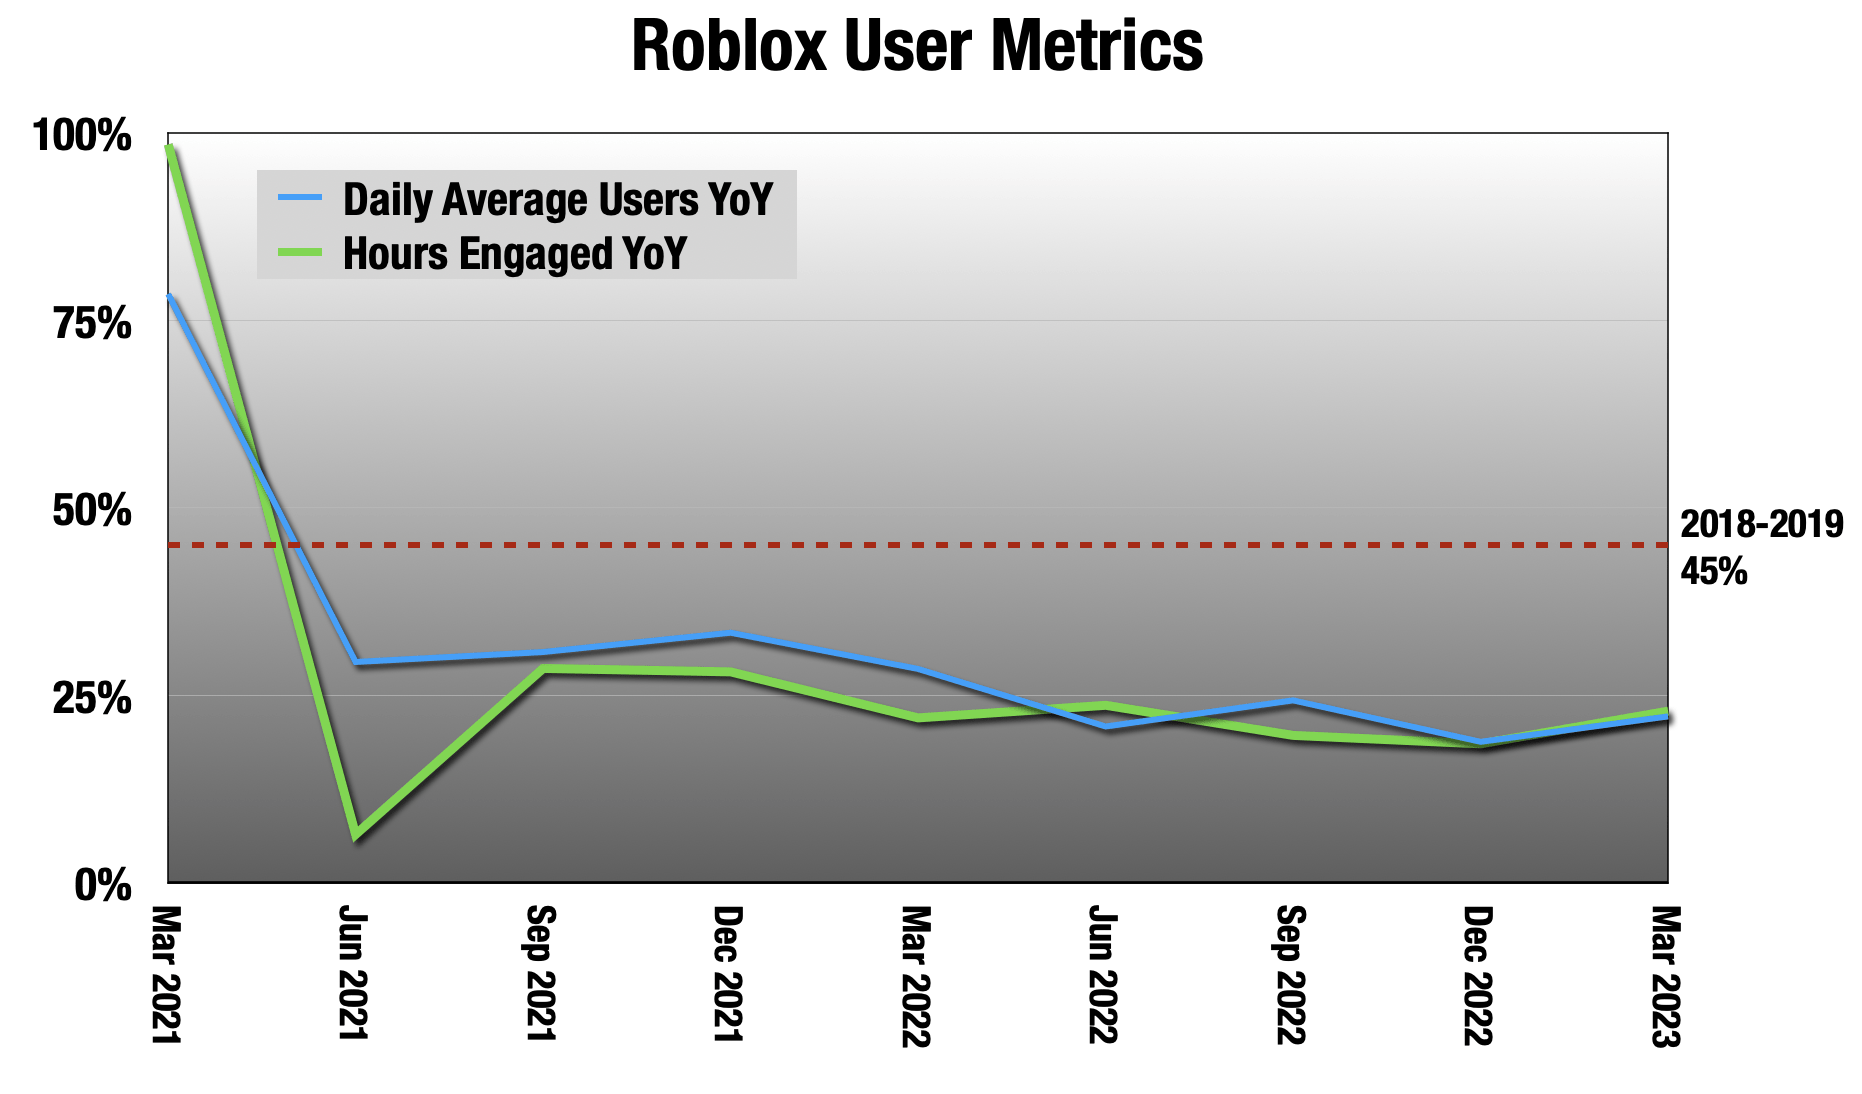 Roblox Earnings: Aggressively Diversifying Its User Demographics  (NYSE:RBLX)